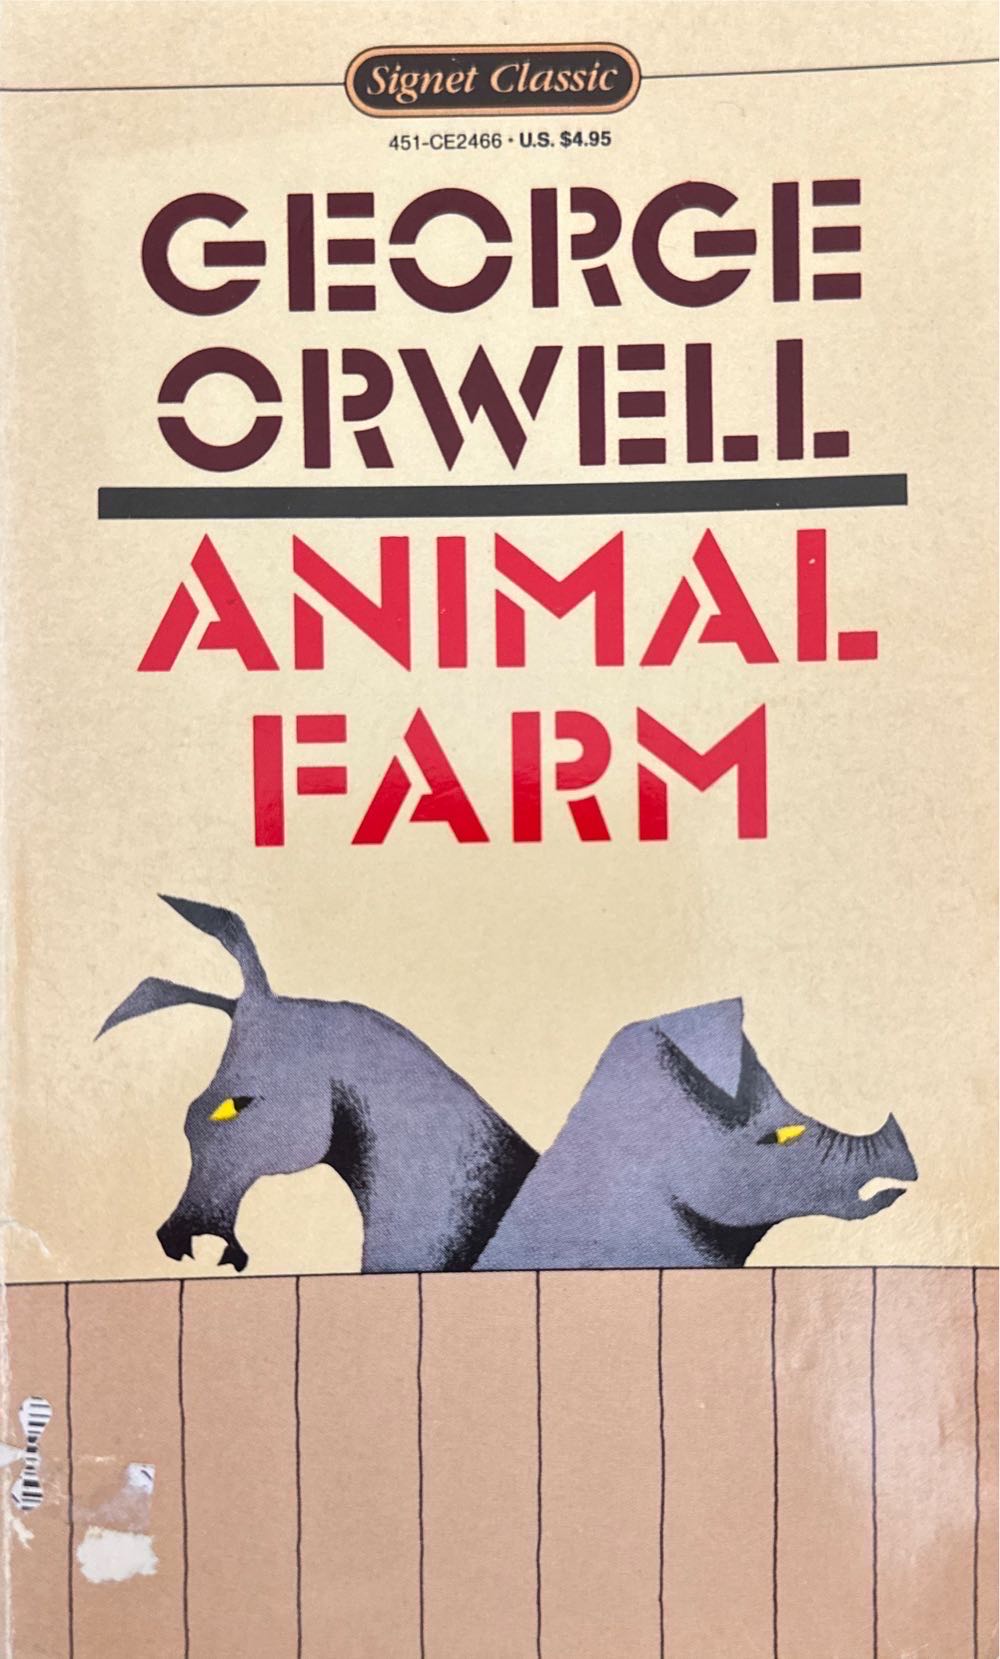 Animal Farm - George Orwell (A Signet Classic - Paperback) book collectible [Barcode 9780451524669] - Main Image 3